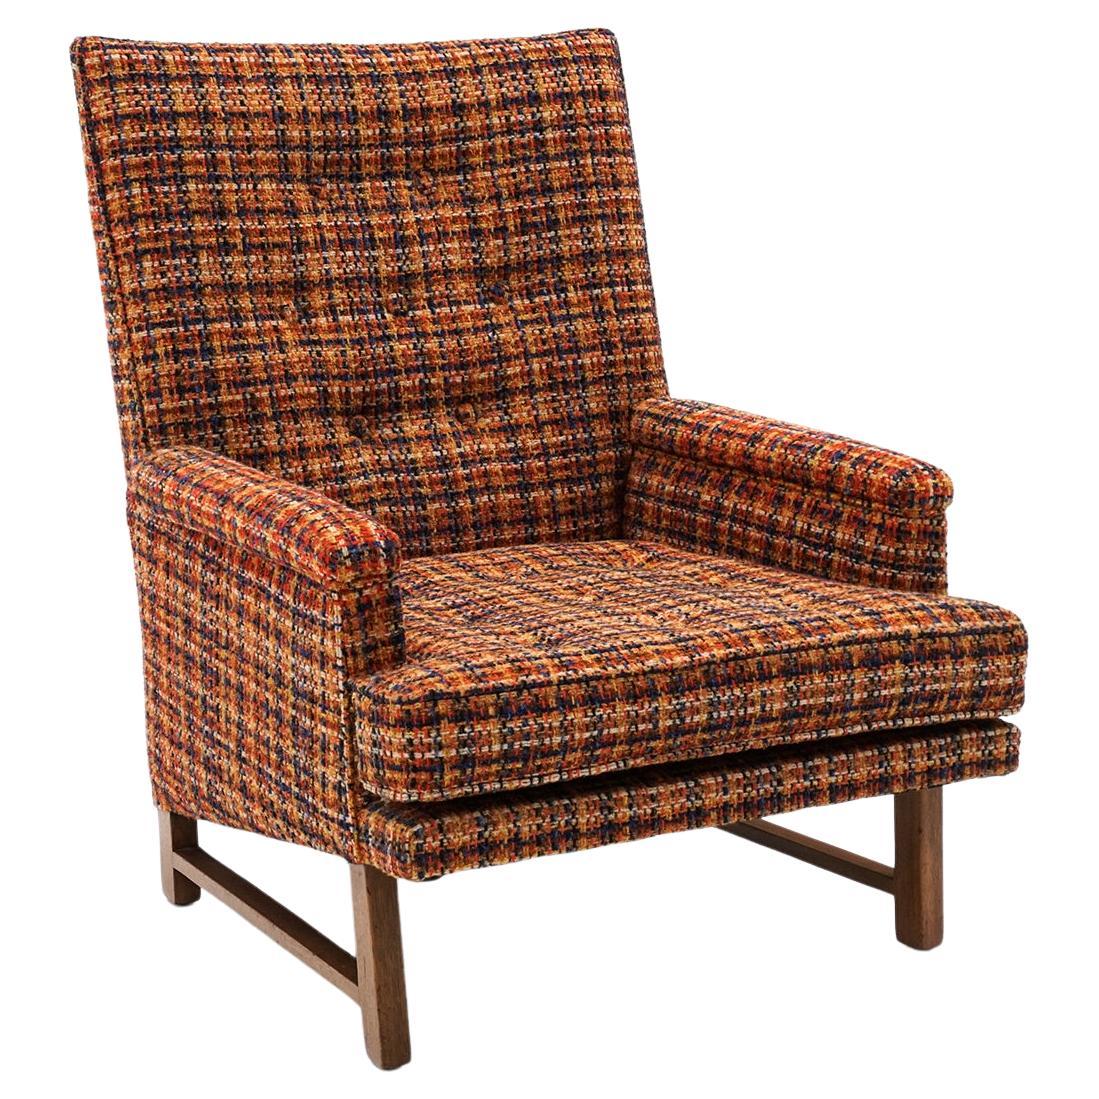 Edward Wormley for Dunbar Lounge Chair, Priced for Reupholstery